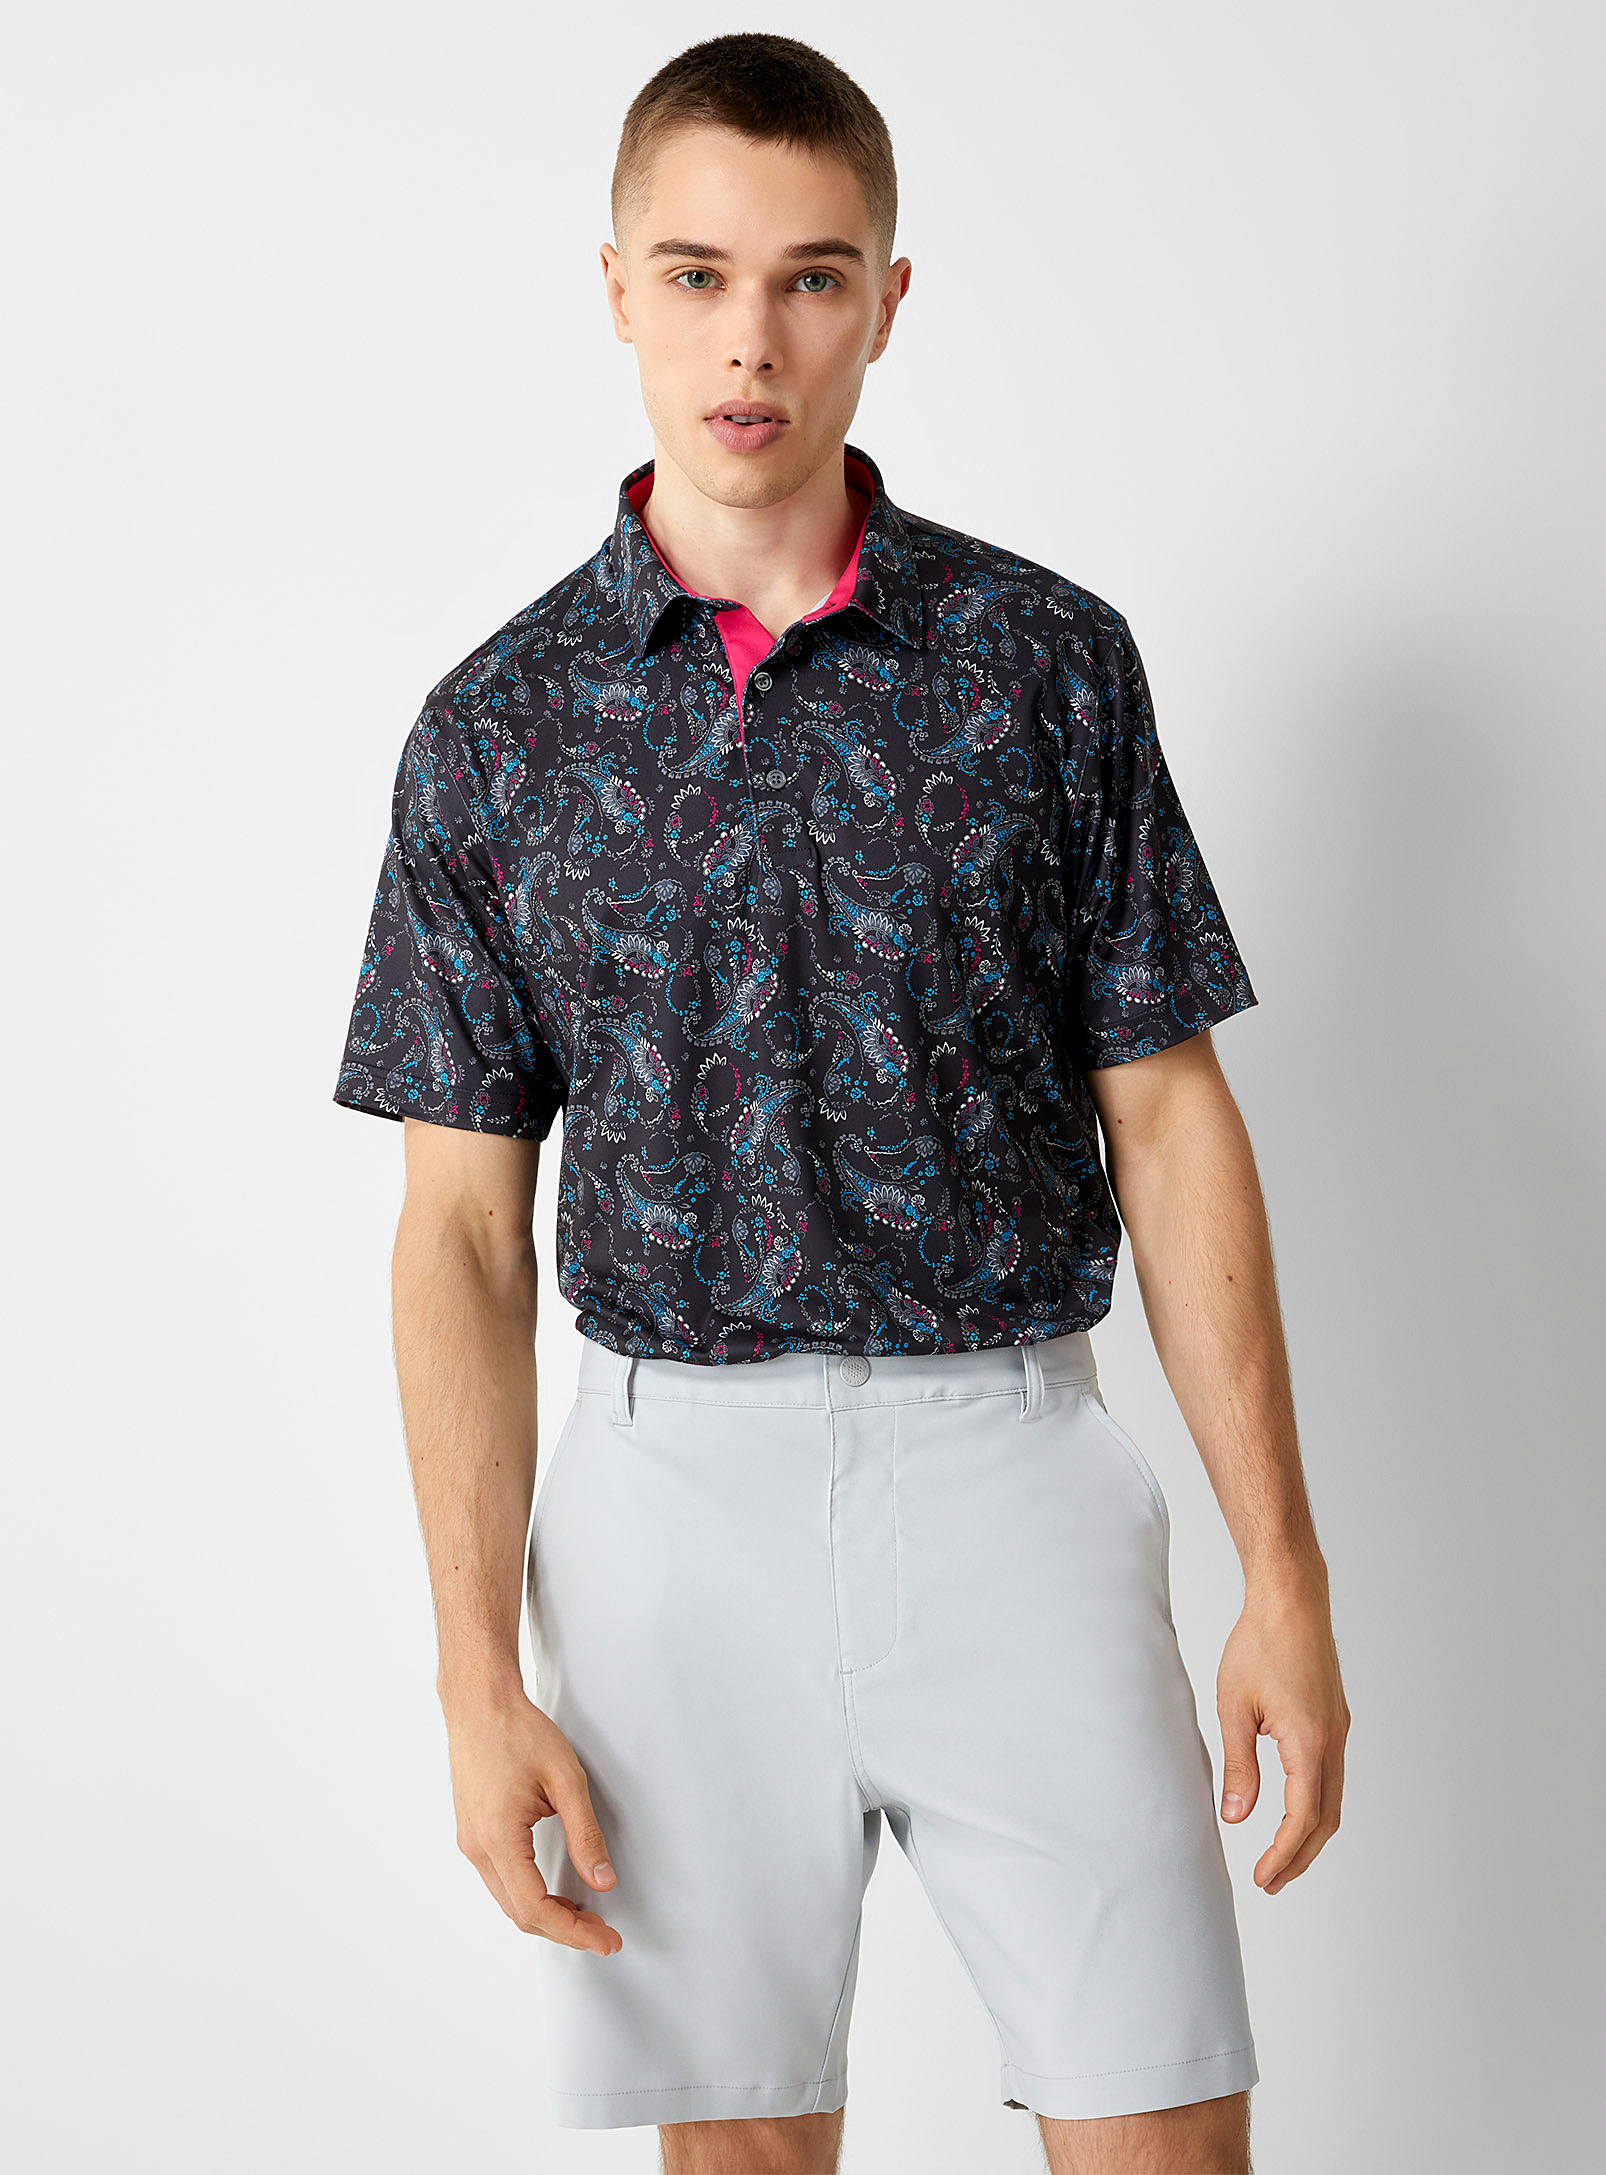 Puma Golf Cloudspun Paisley Golf Polo In Patterned Black